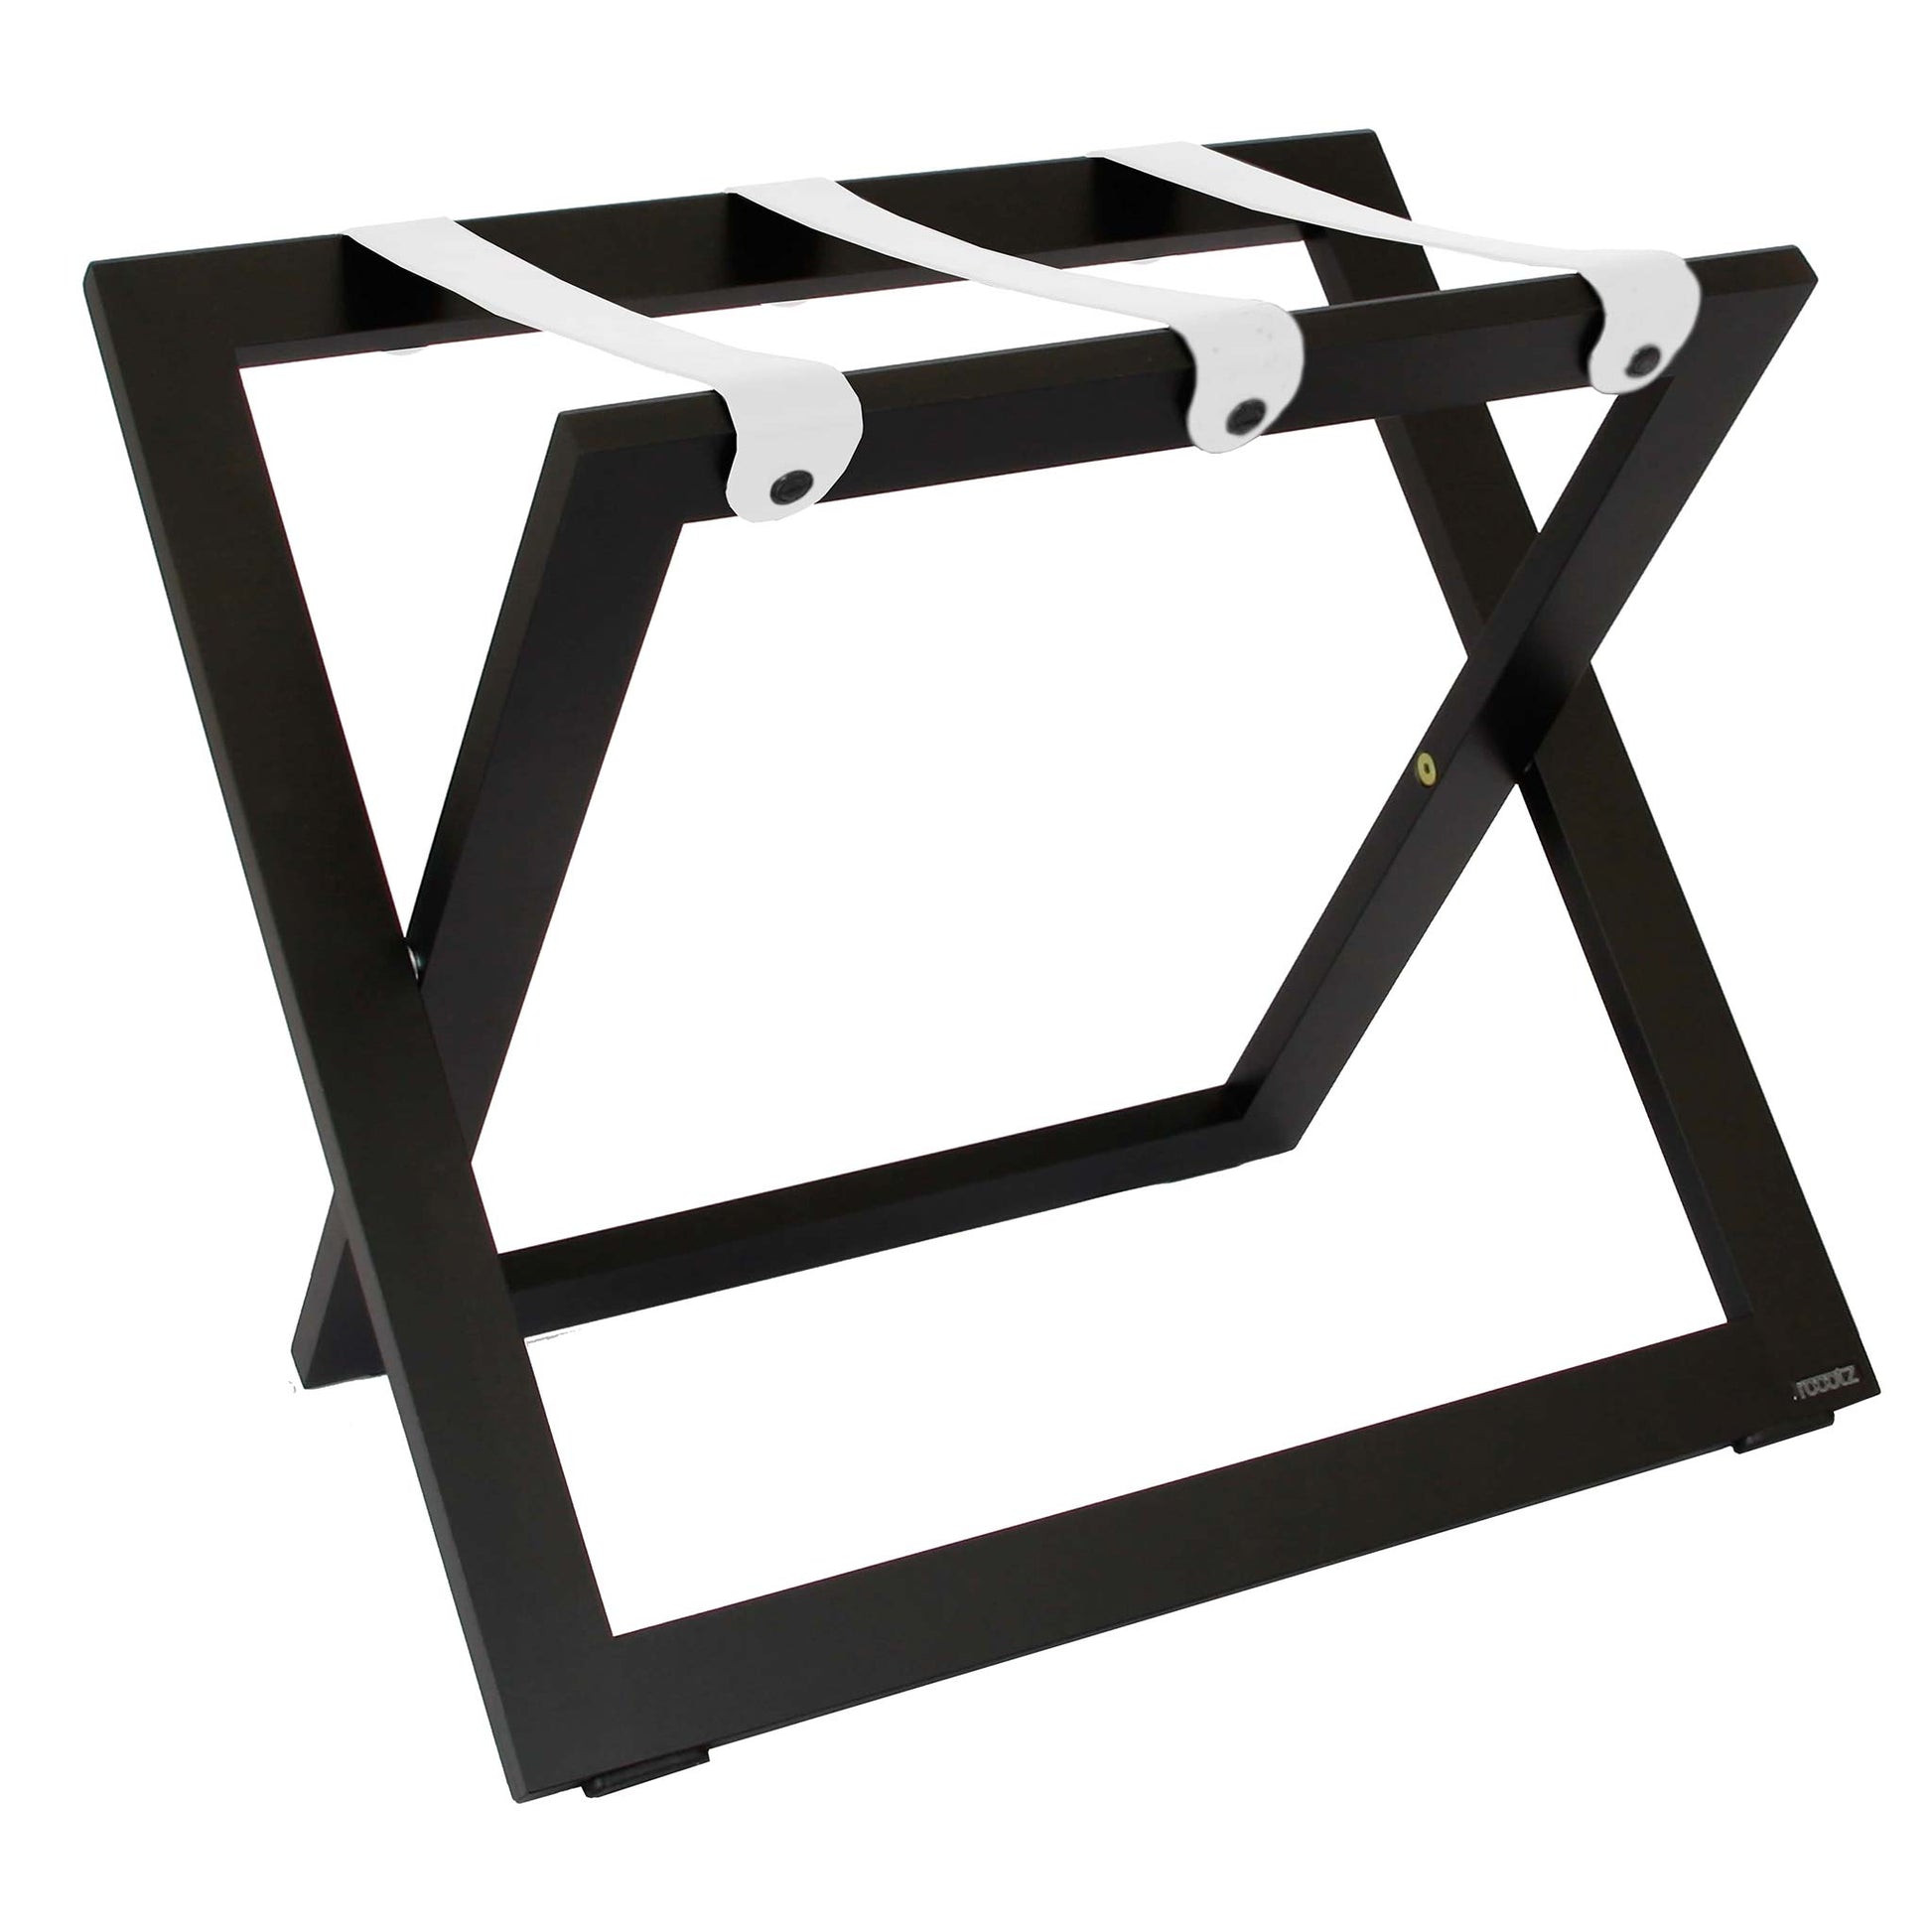 Roootz compact black wooden hotel luggage rack with white leather straps